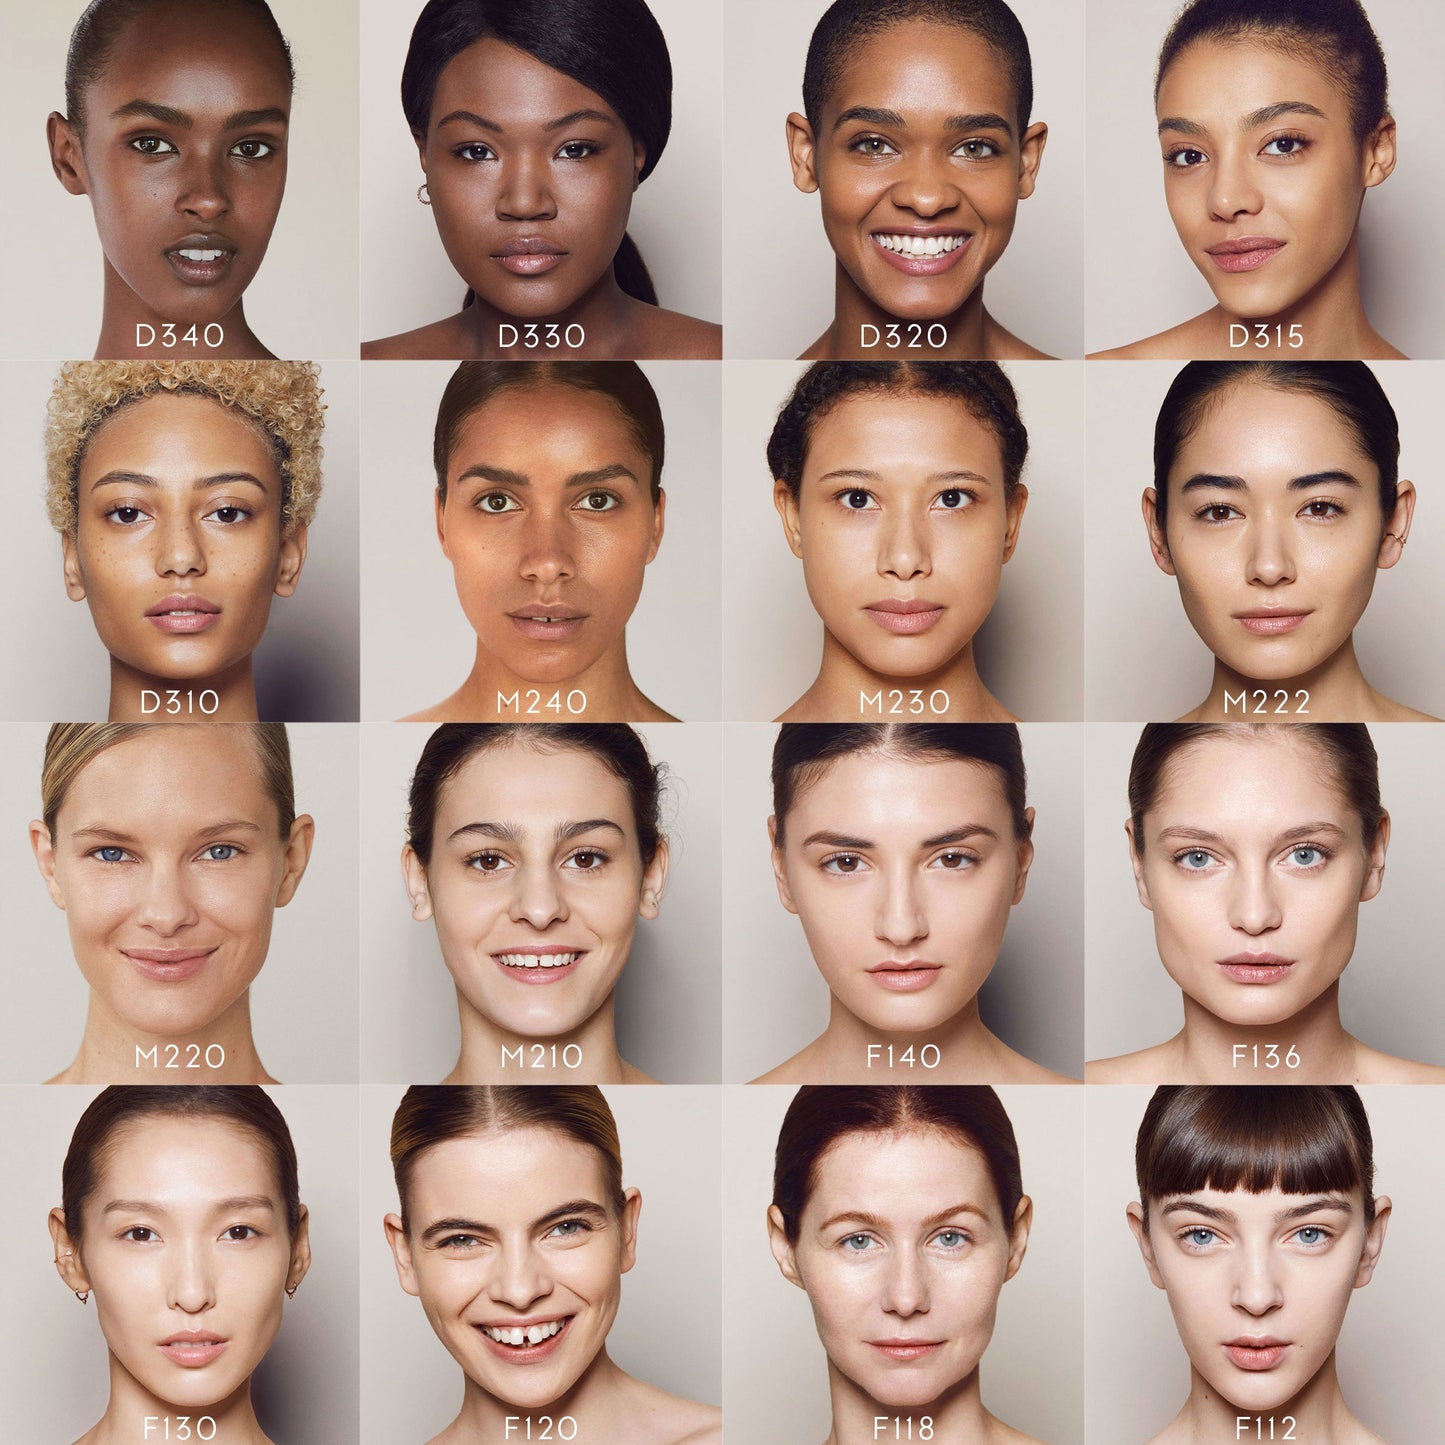 Close ups of various faces of different skin tones, from dark to light with the foundation shades they are wearing. M210 is the seventh-lightest shade shown. 